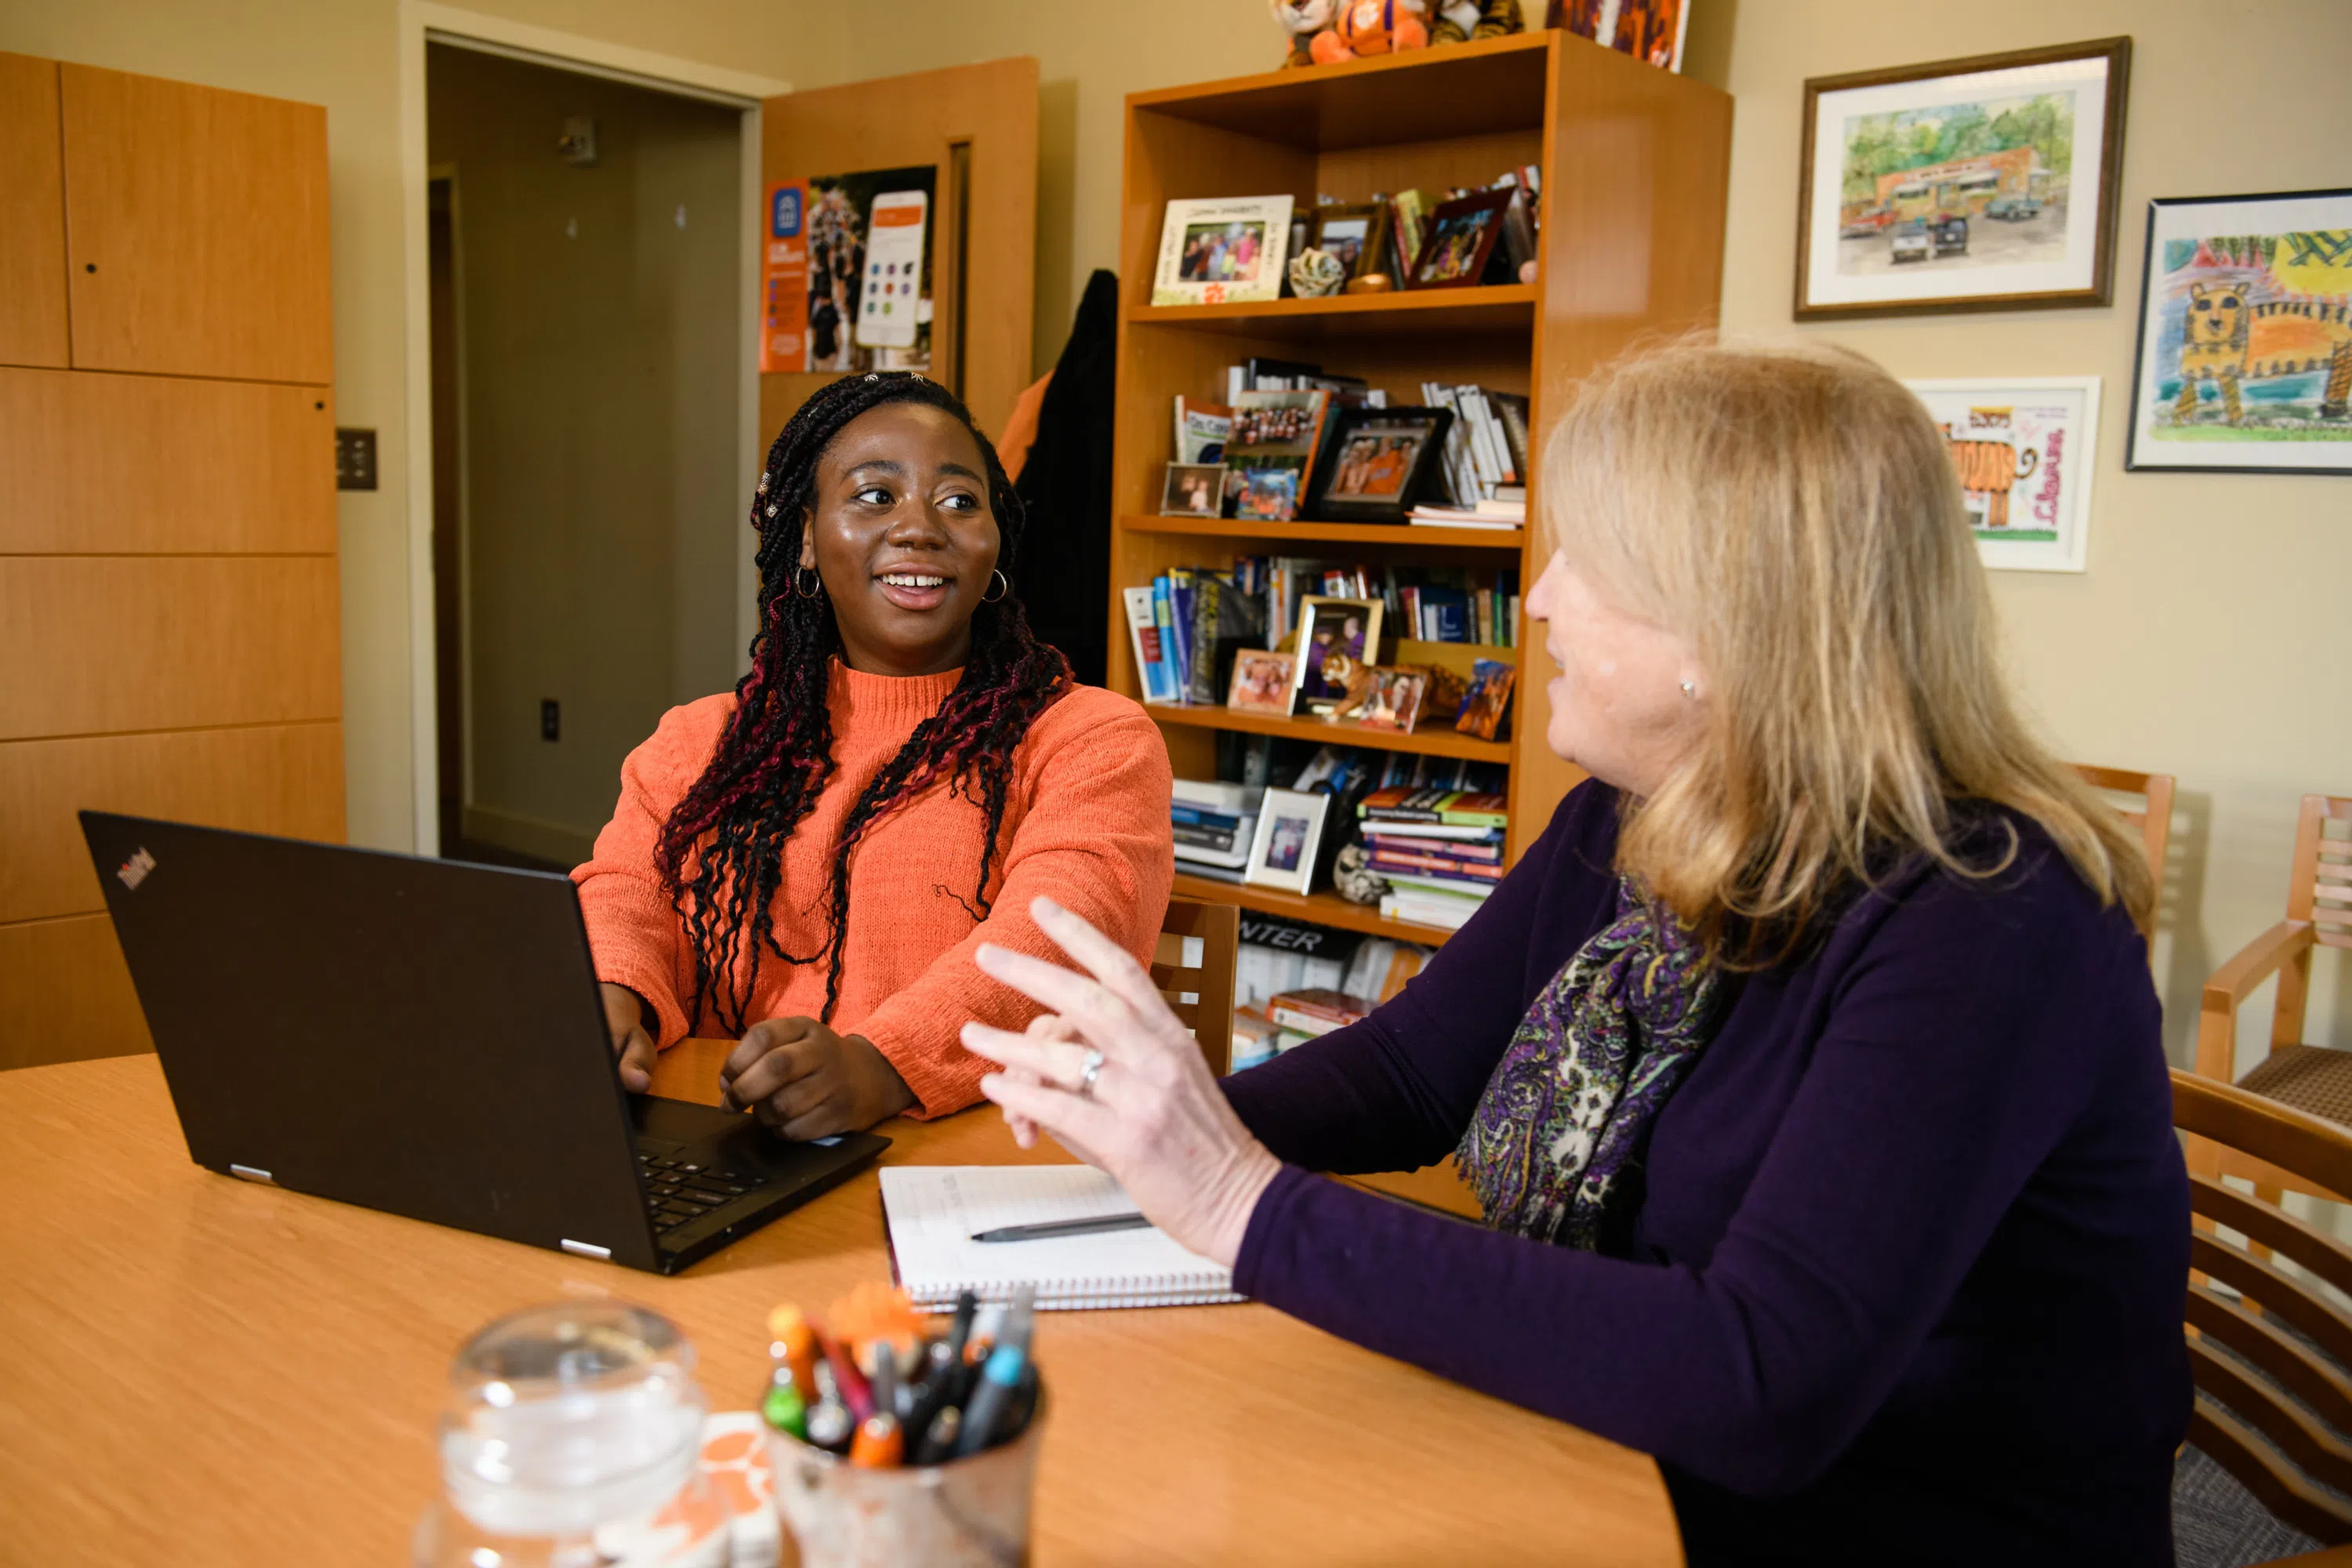 Student Janaida Williams meets with her advisor Sue Whorton in the Academic Success Center.